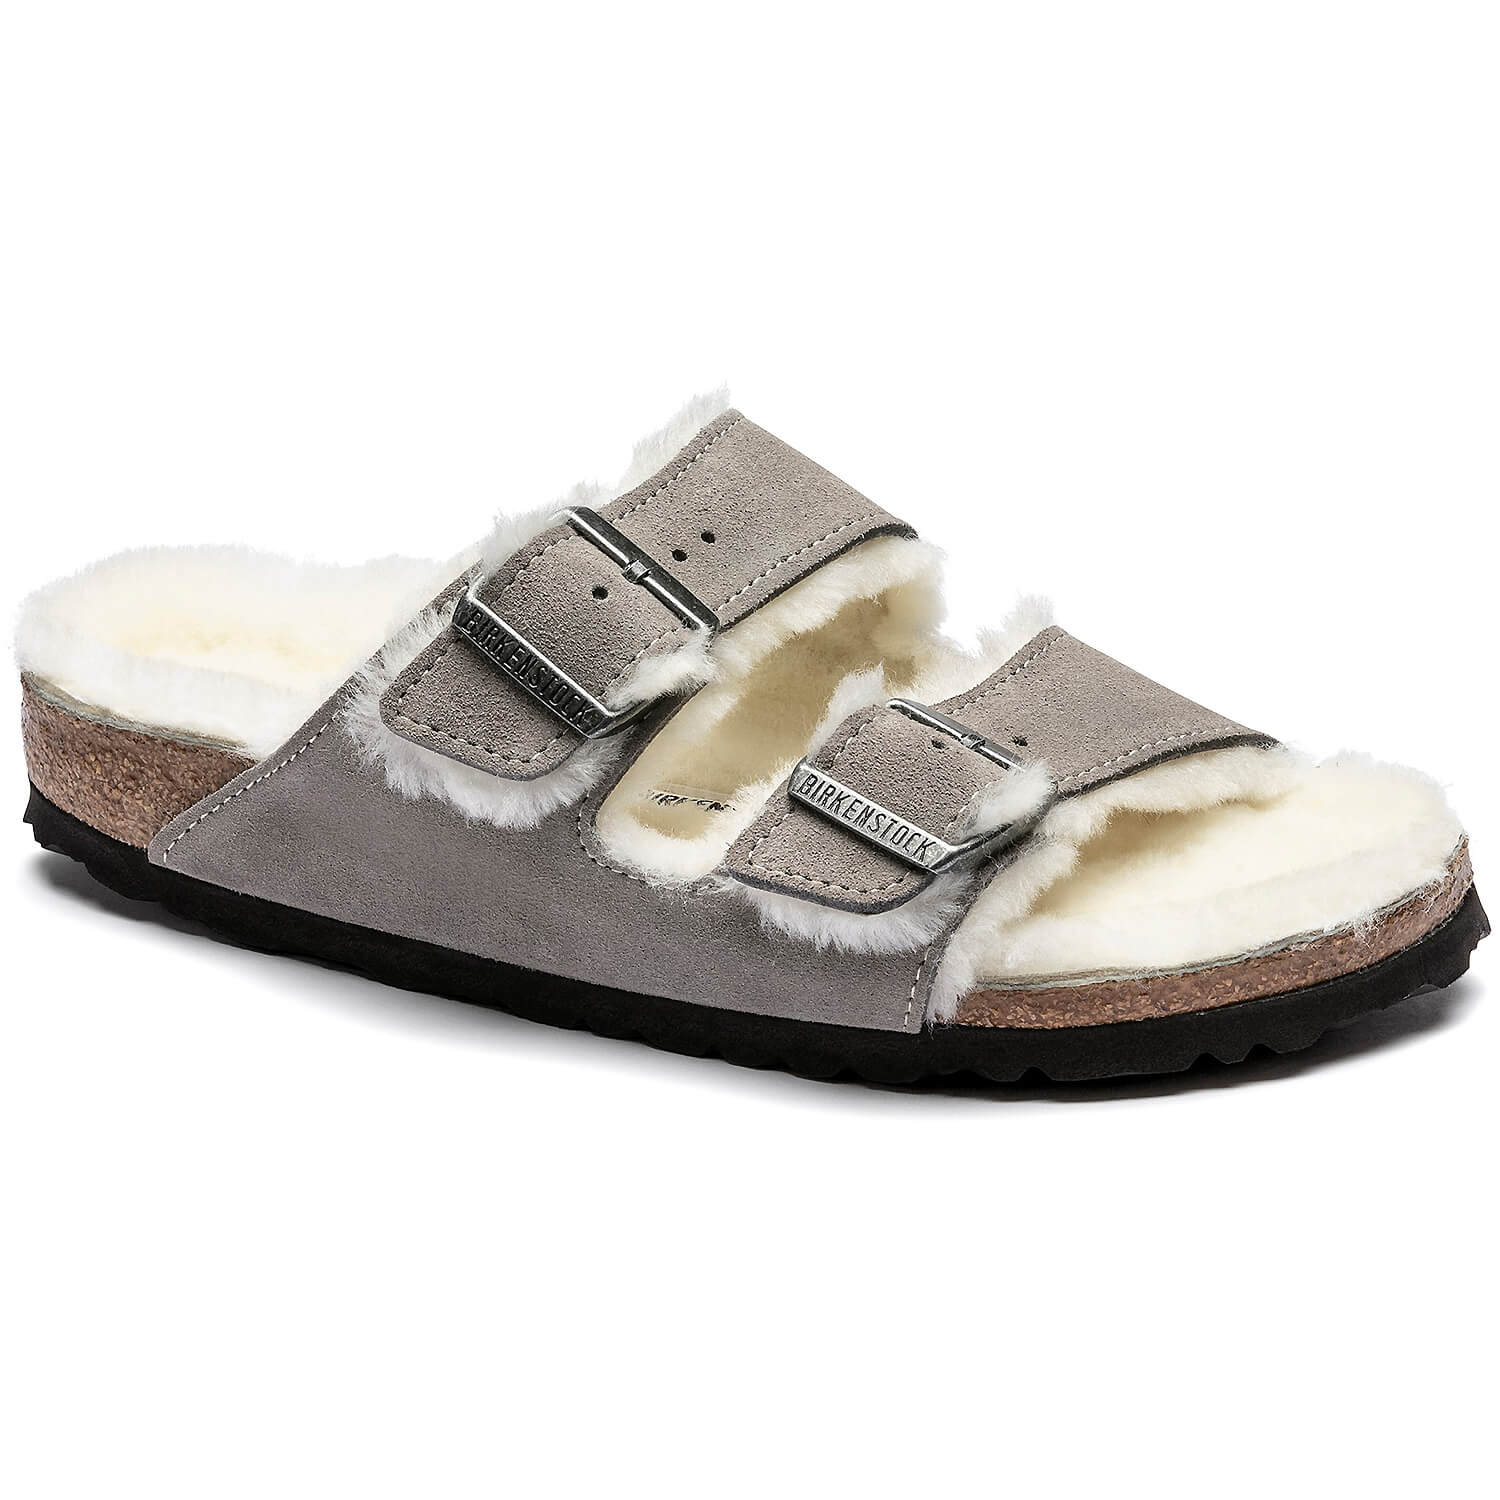 Sandale Arizona Shearling Suede Leather